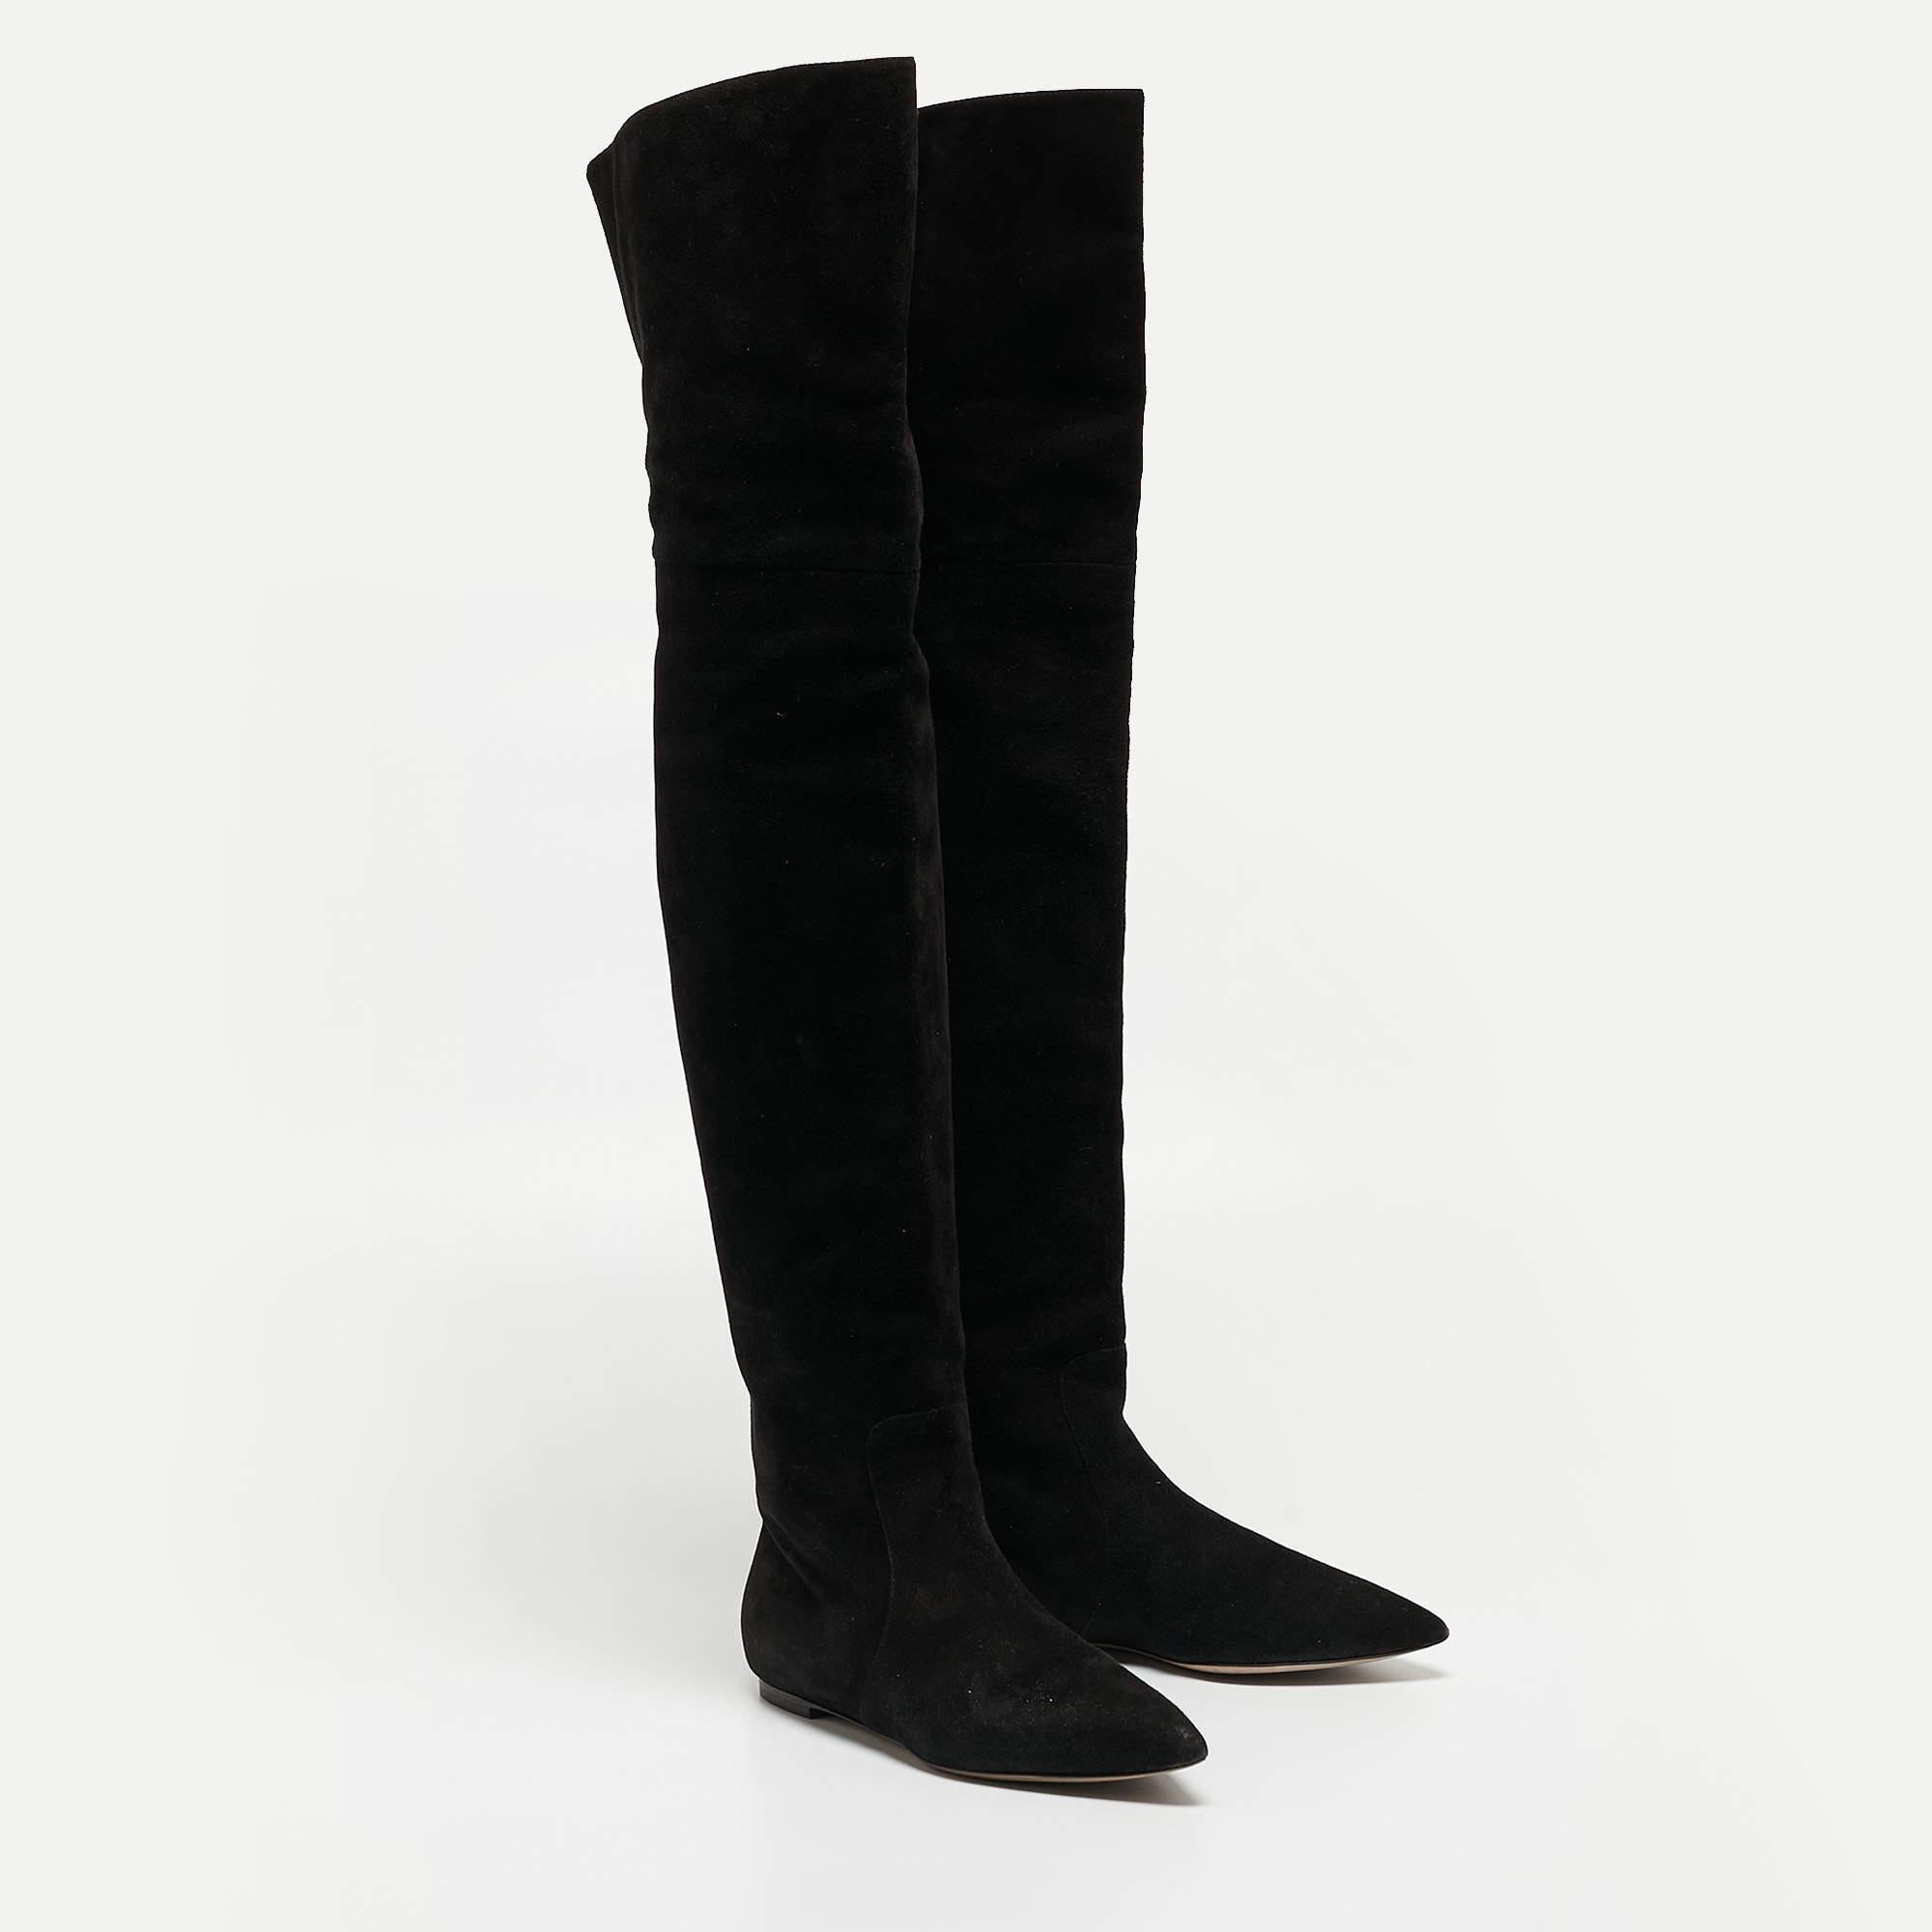 Dolce & Gabbana Black Suede Over The Knee Boots Size 37.5 For Sale 1